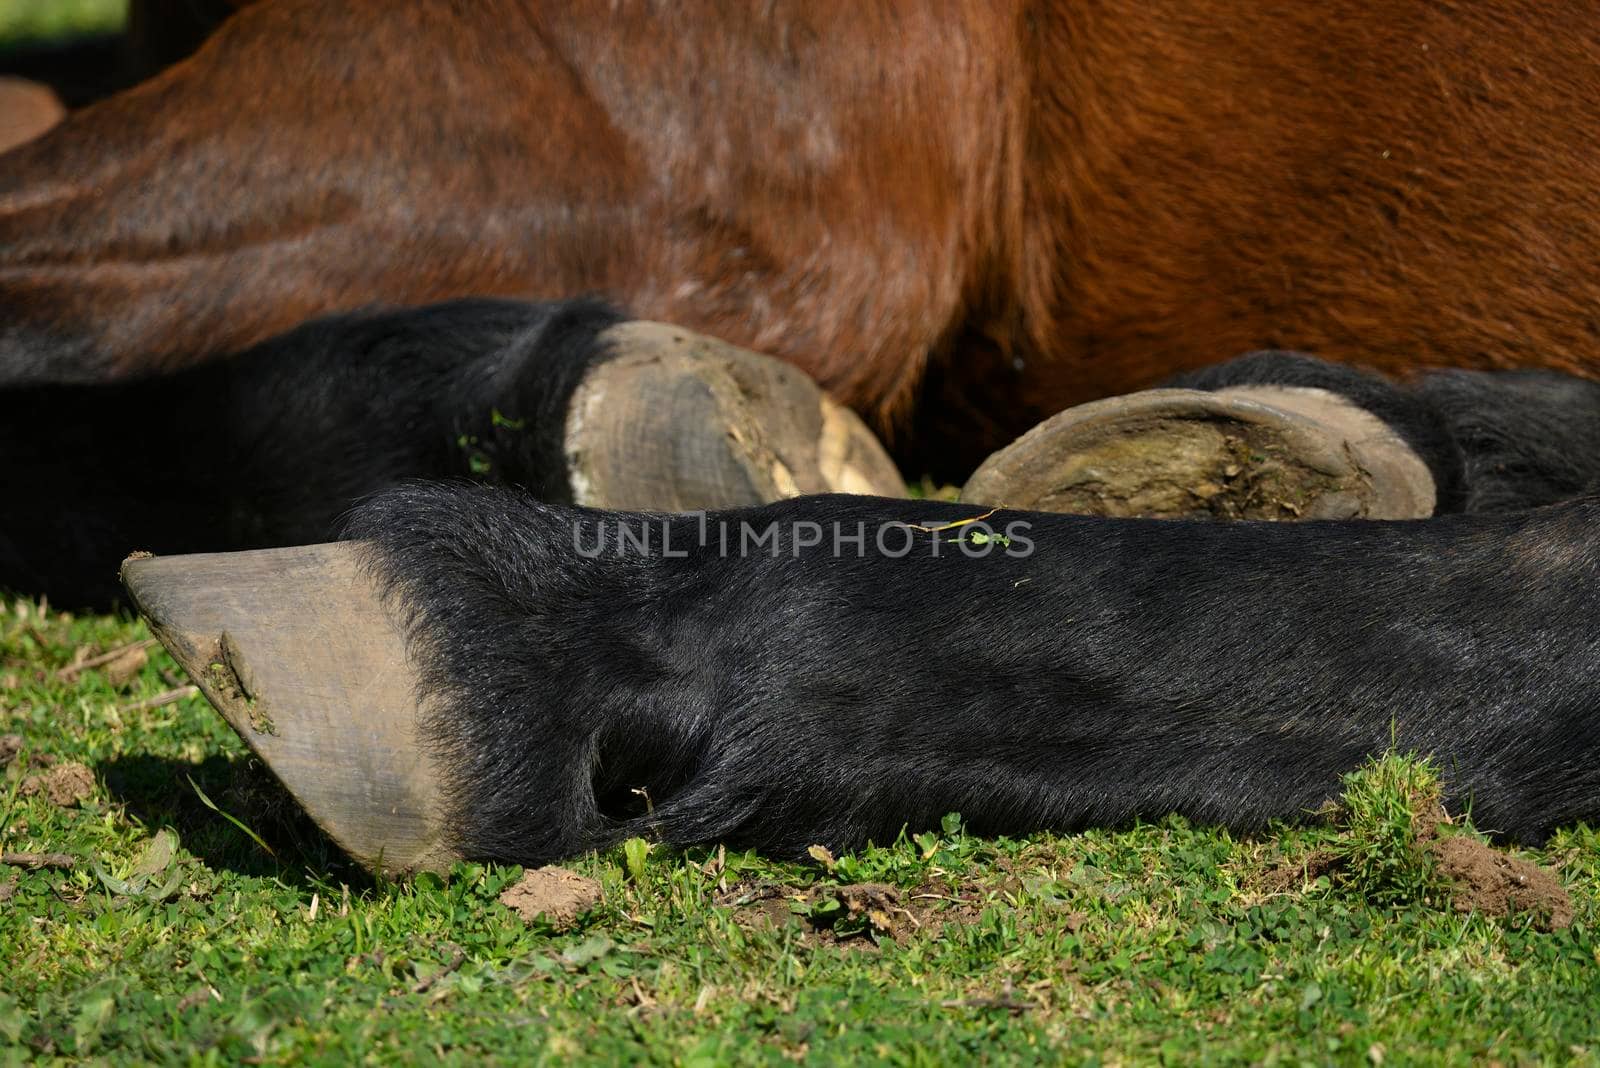 Close up of hoofs of horse resting on green grass